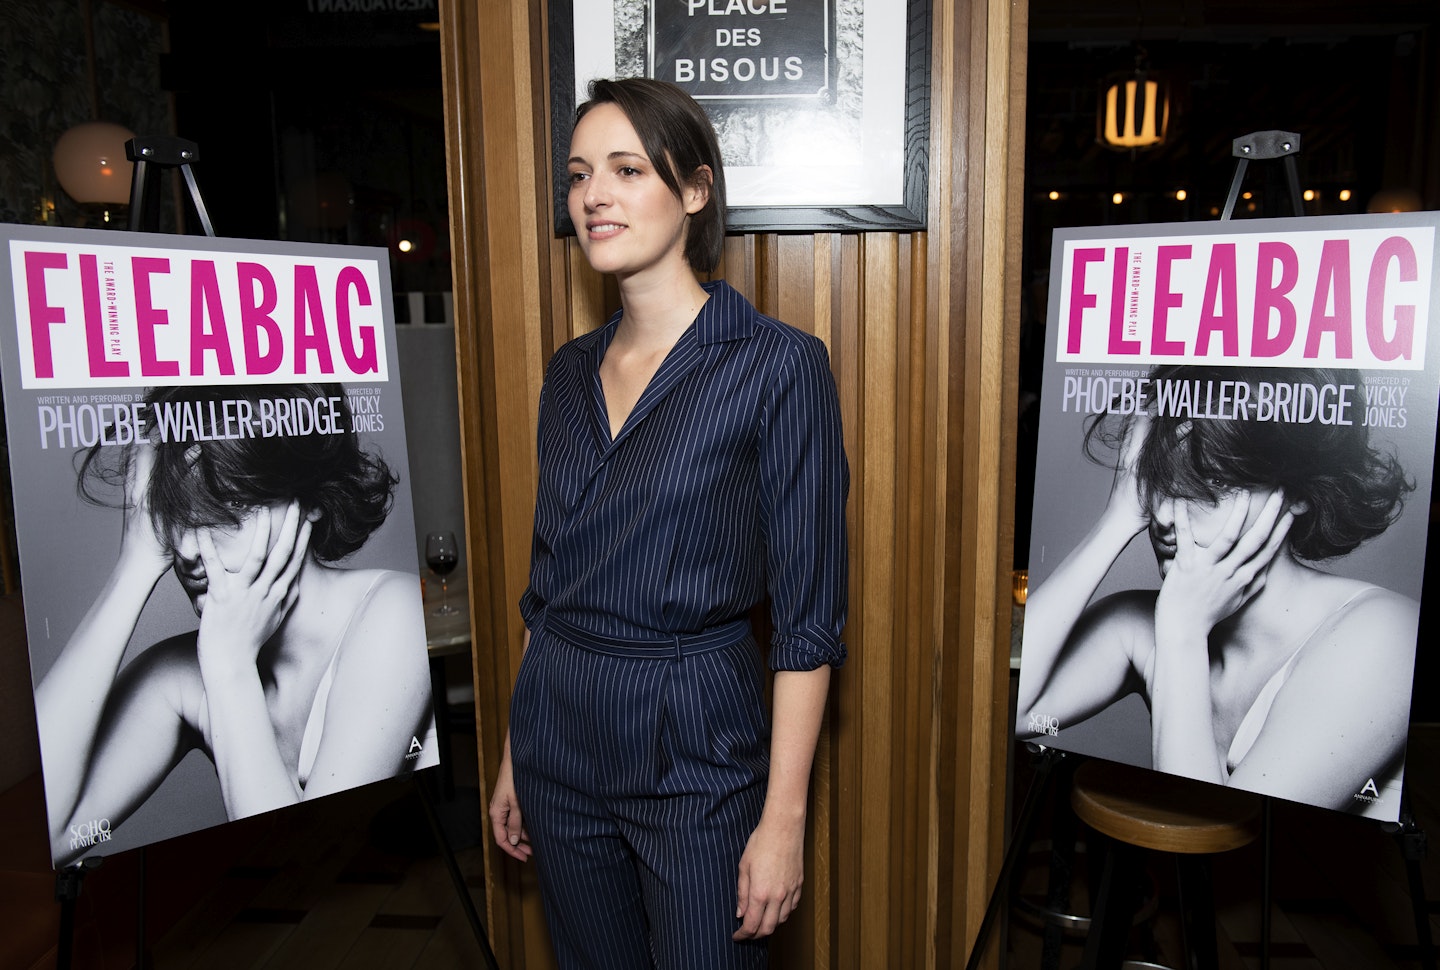 Phoebe Waller-Bridge is the star of Fleabag and she produces Killing Eve